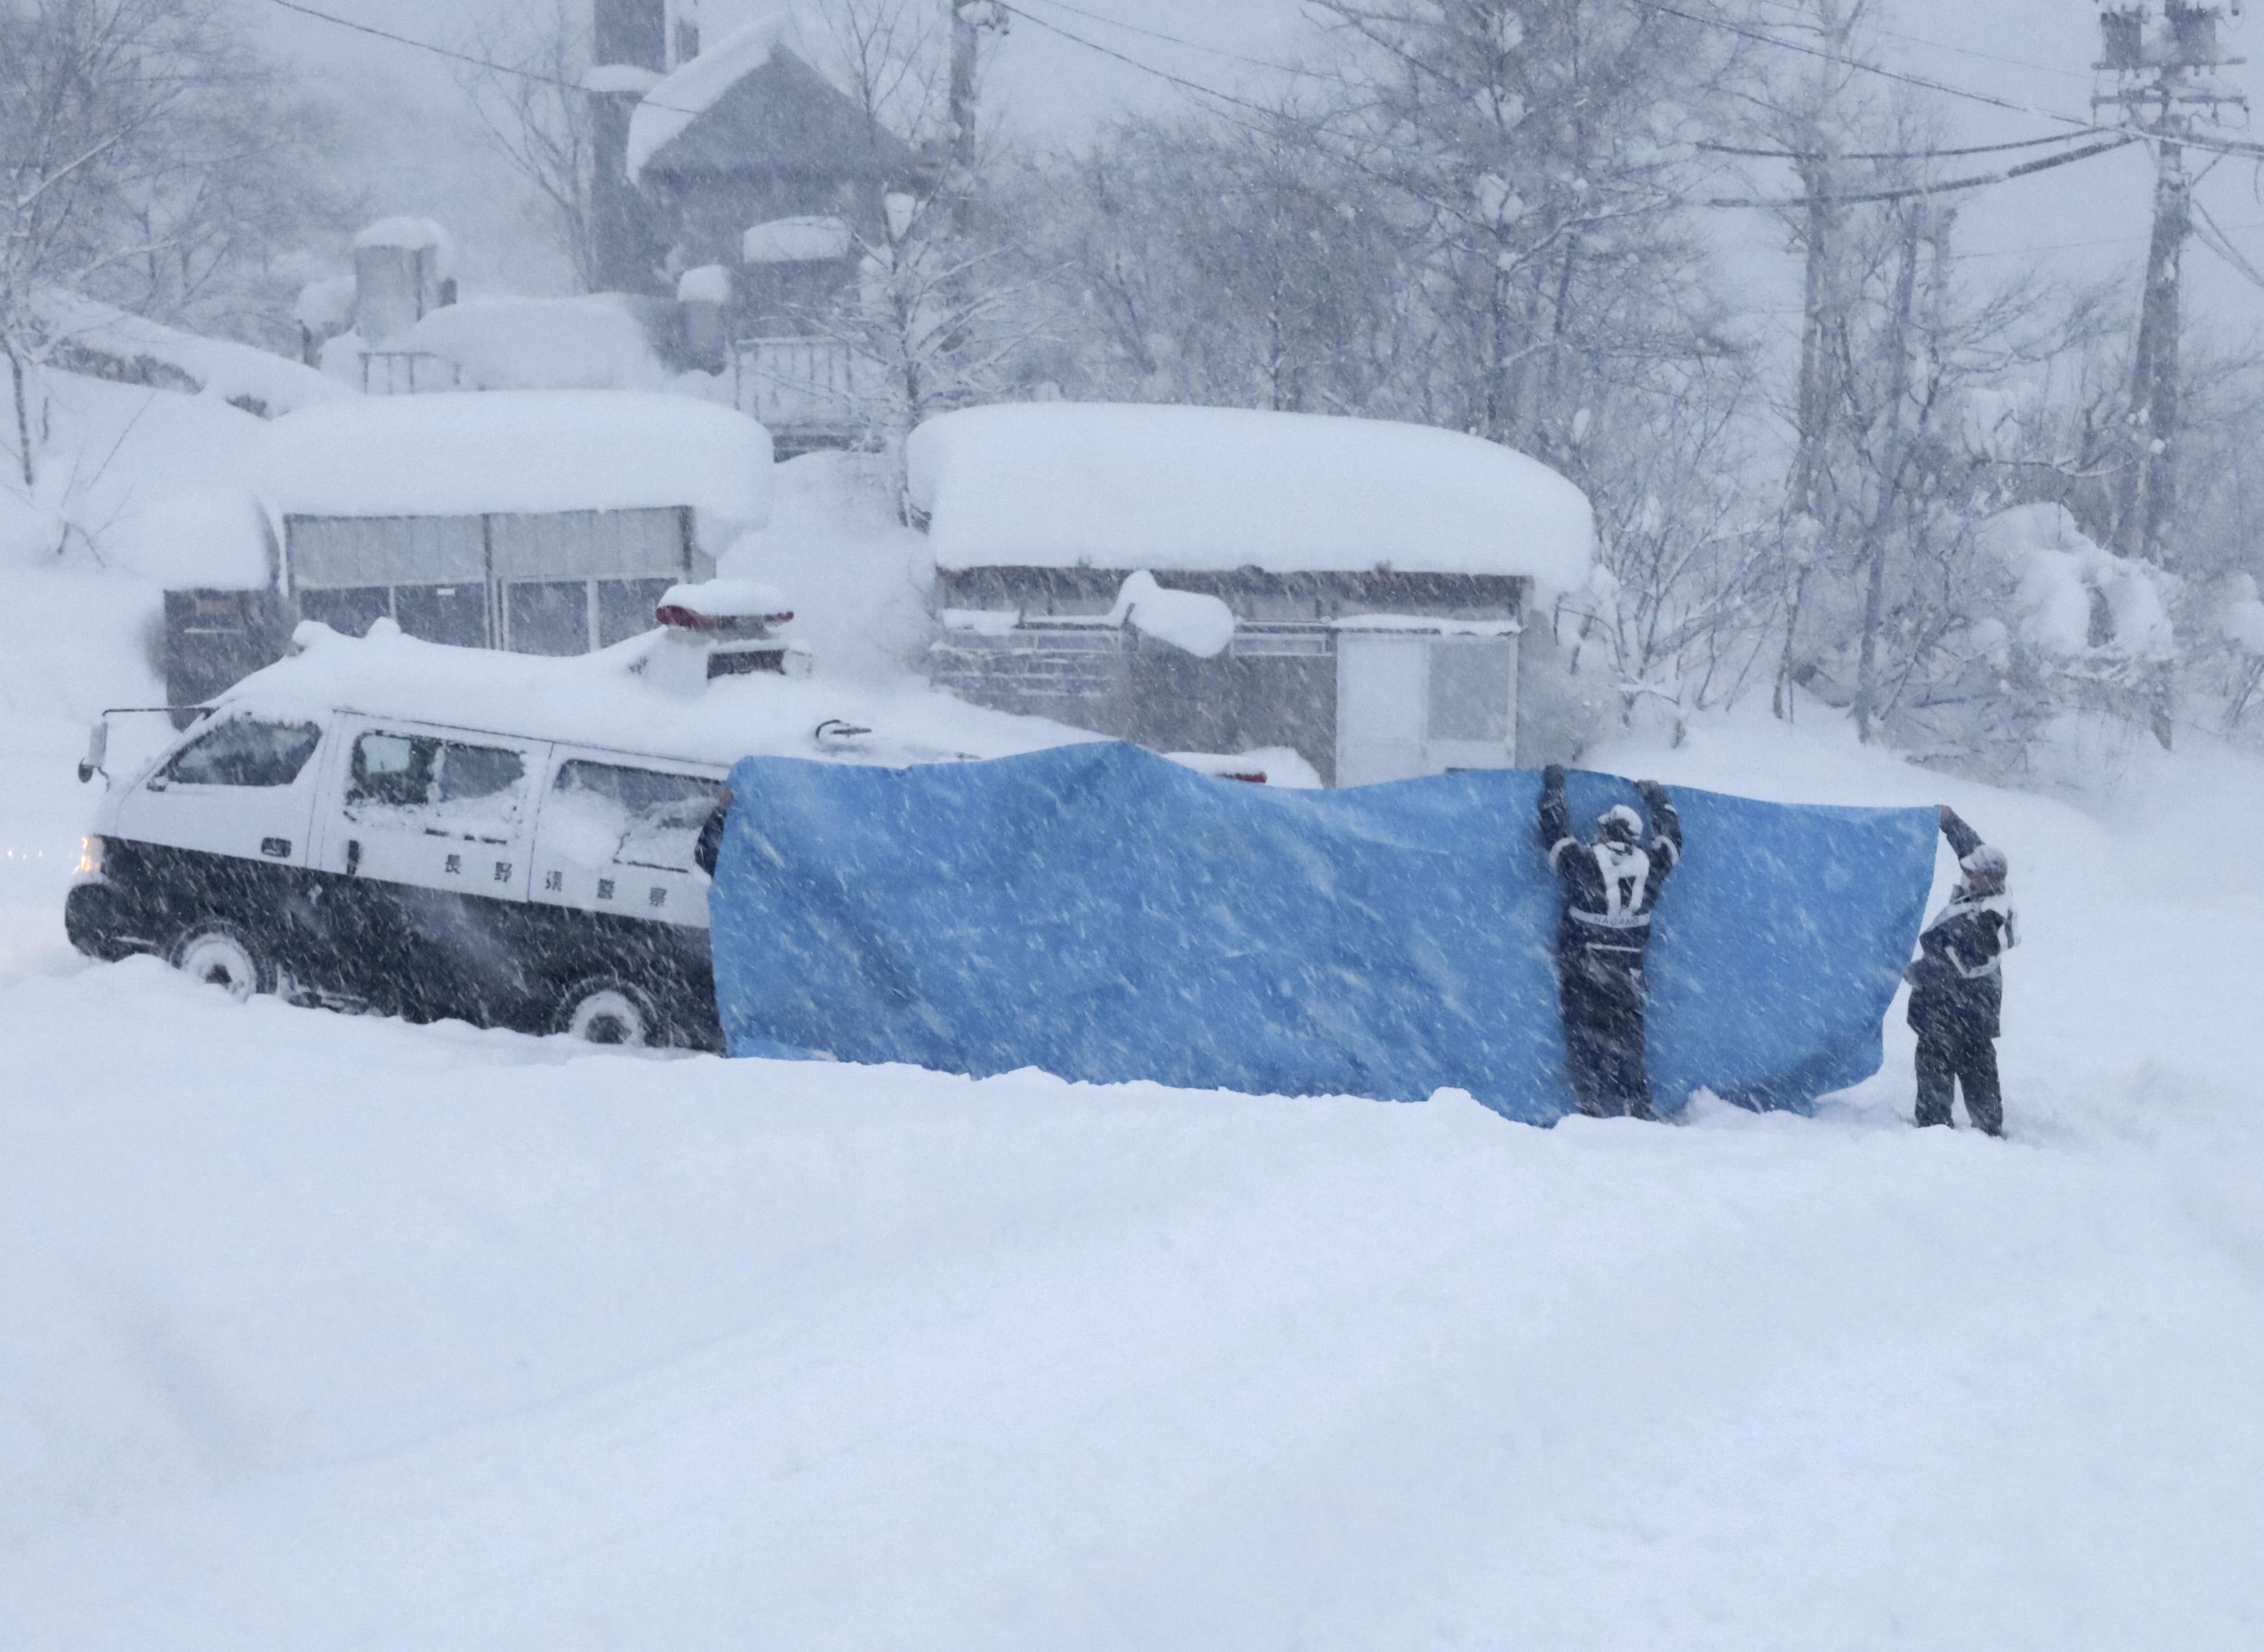 File - Rescue crews work to recover bodies after an avalanche